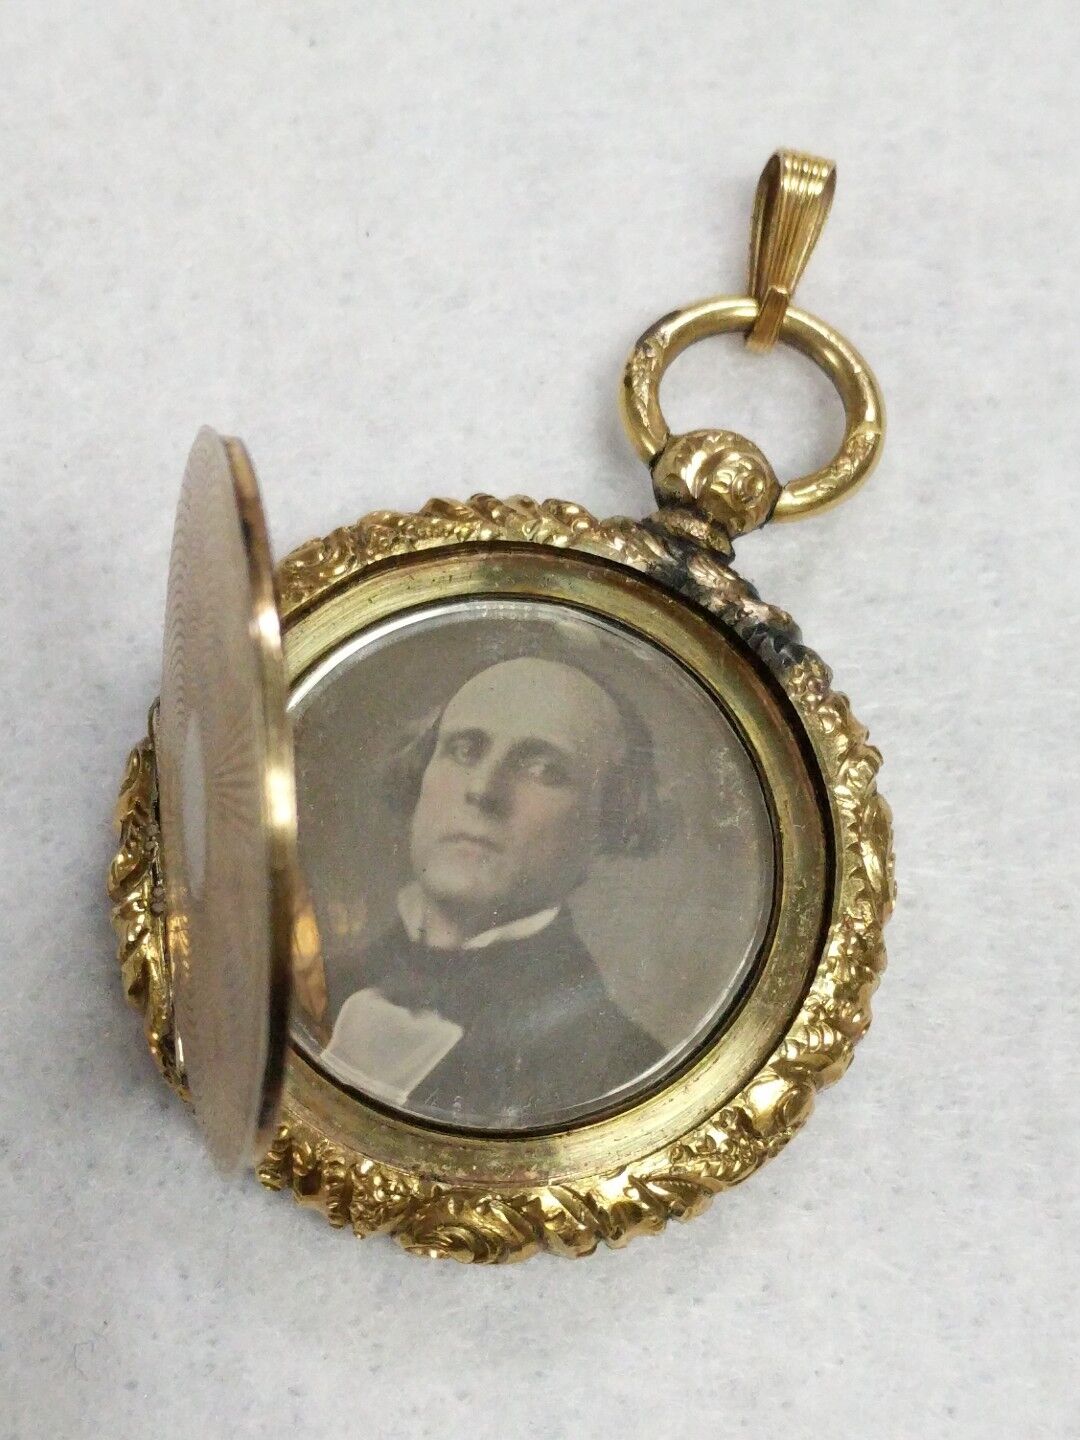 Exquisite Antique Gold Filled Double Locket with Colored Daguerreotype Photos